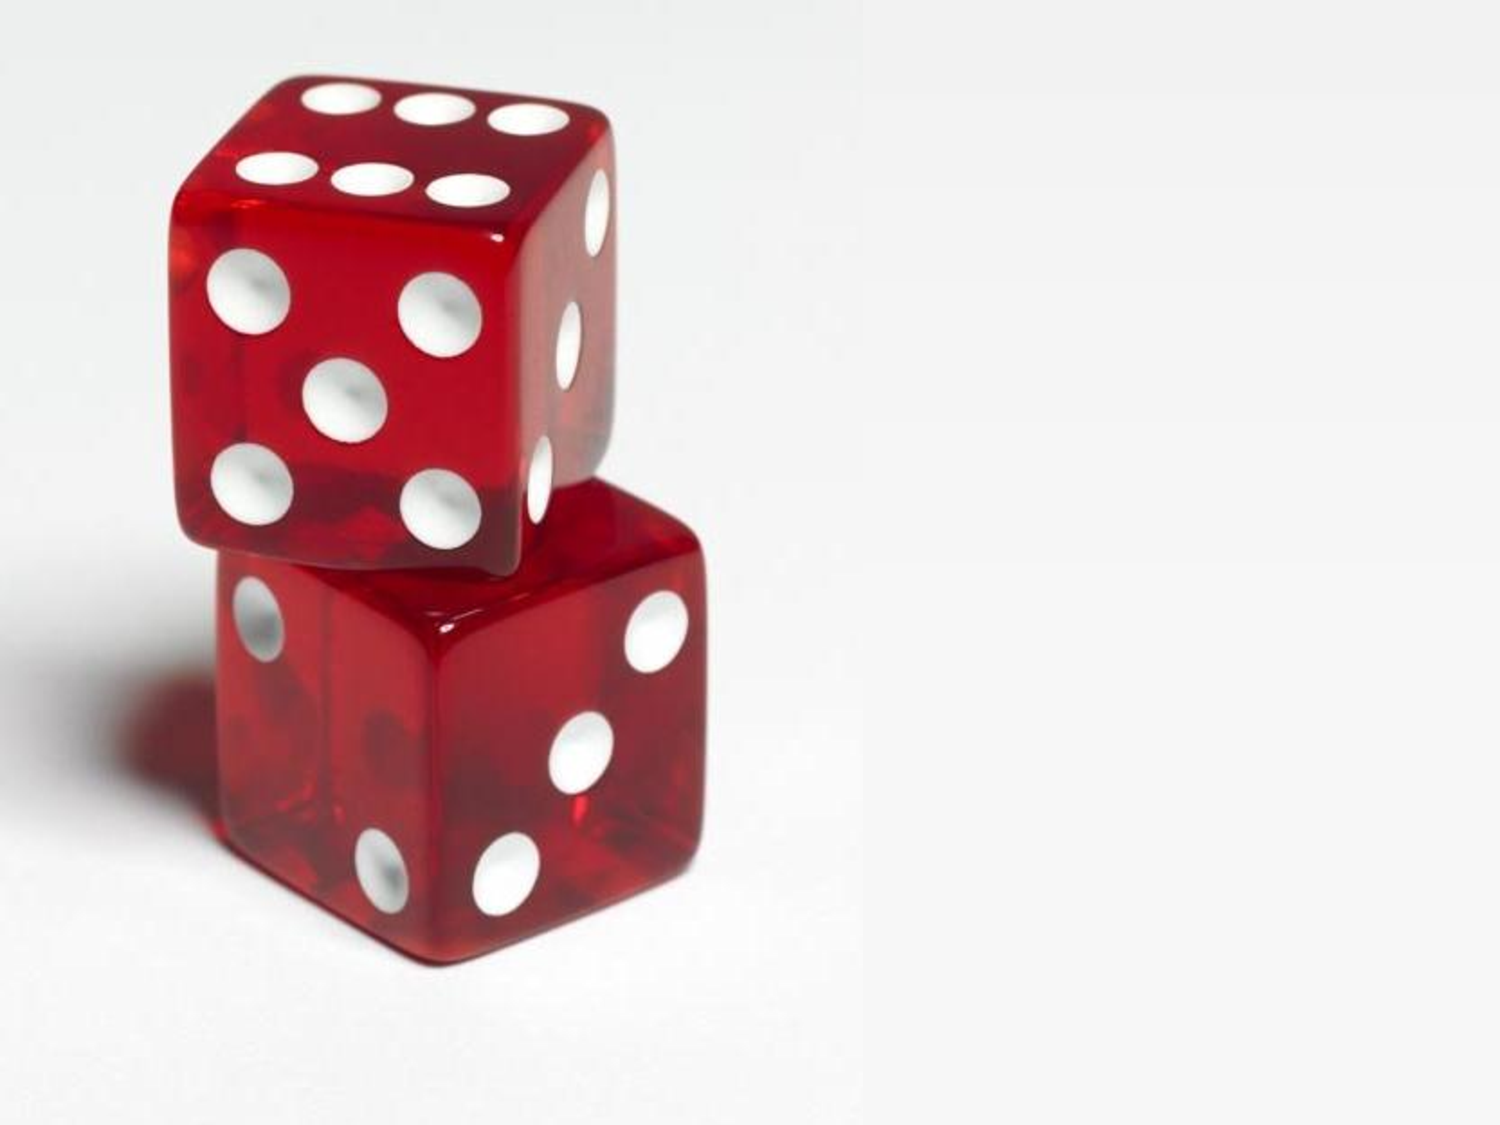 Free Powerpoint Templates Red Dice Content Slide